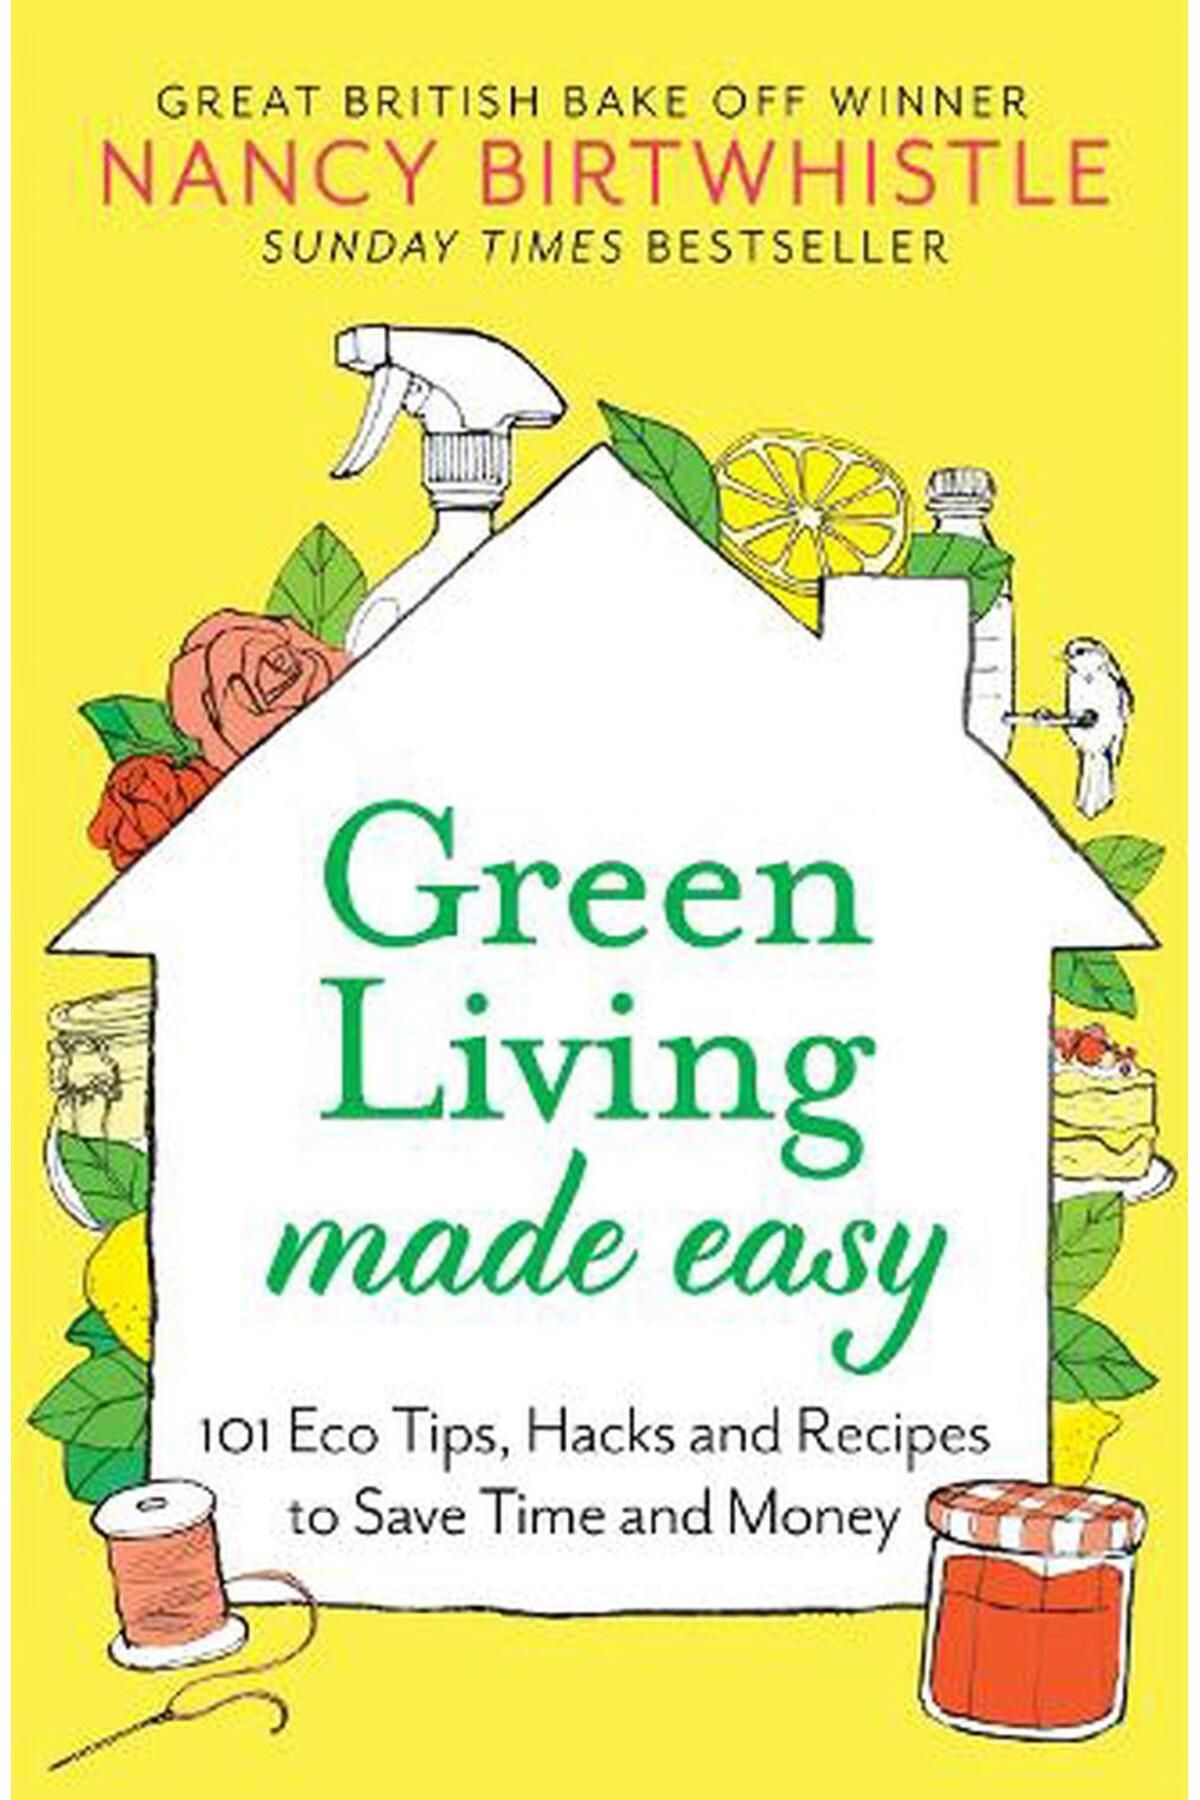 Pan Macmillan Green Living Made Easy 101 Eco Tips, Hacks and Recipes to Save Time and Money